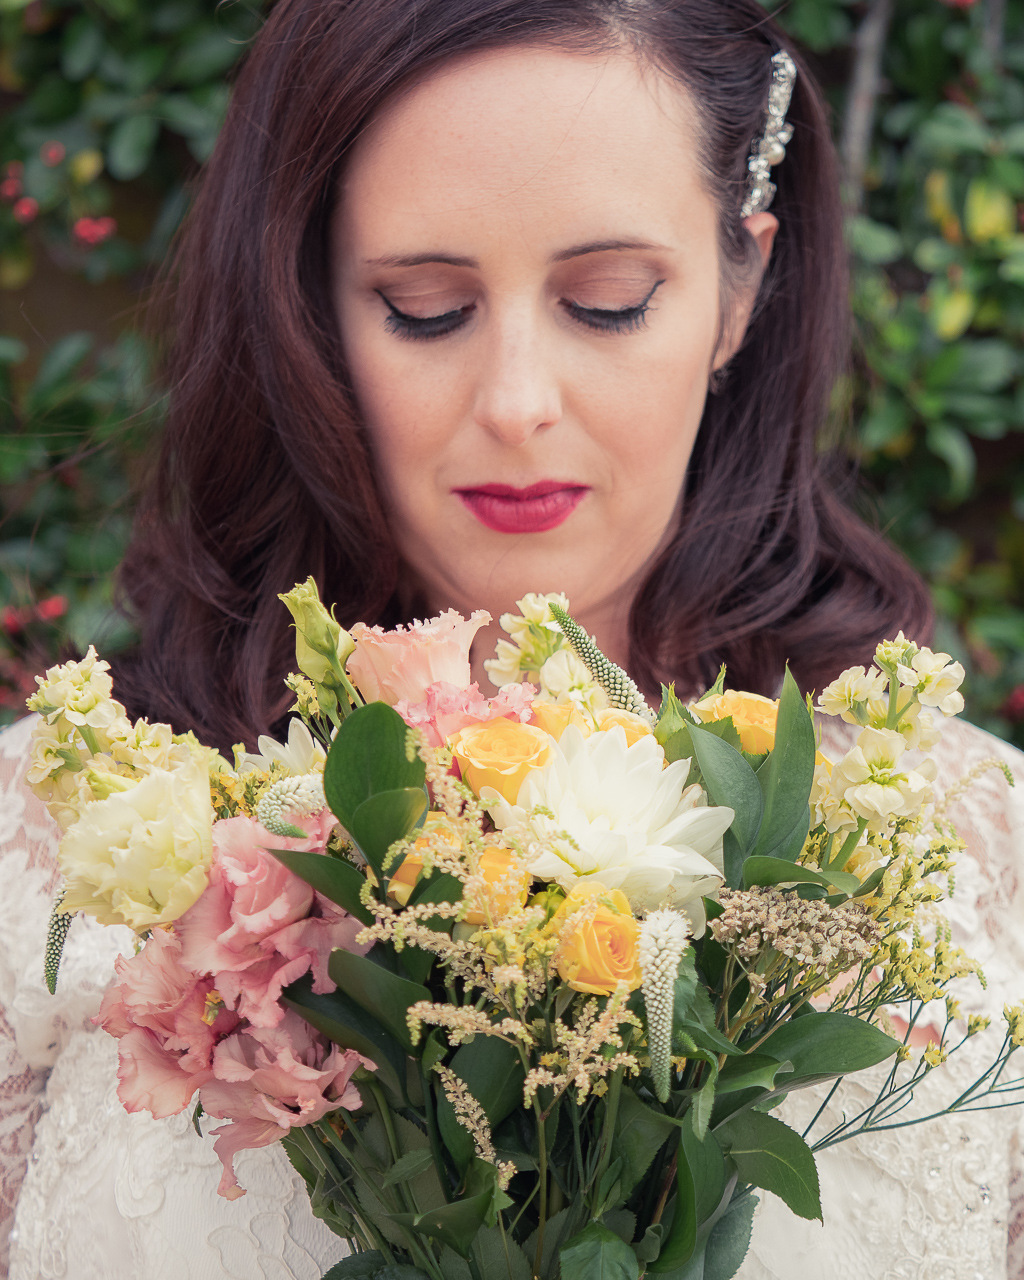 Traditional vintage styled wedding photoshoot at The Orangery Suite, photographer credit Dom Brenton Photography (49)